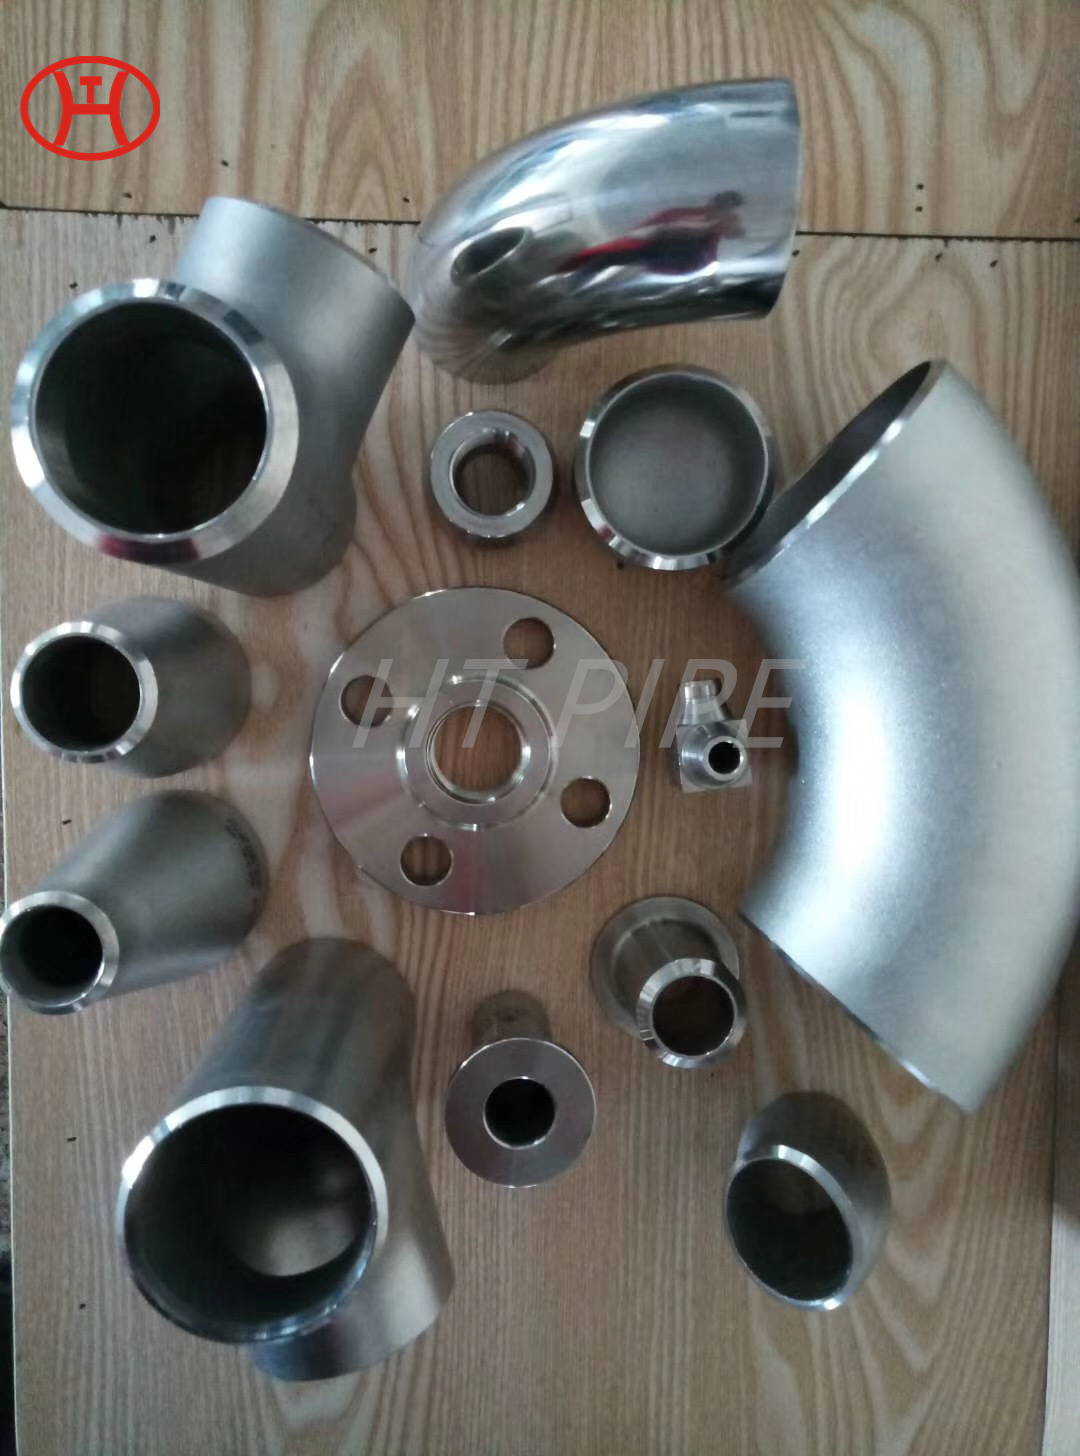 321 stainless steel pipe fitting elbow